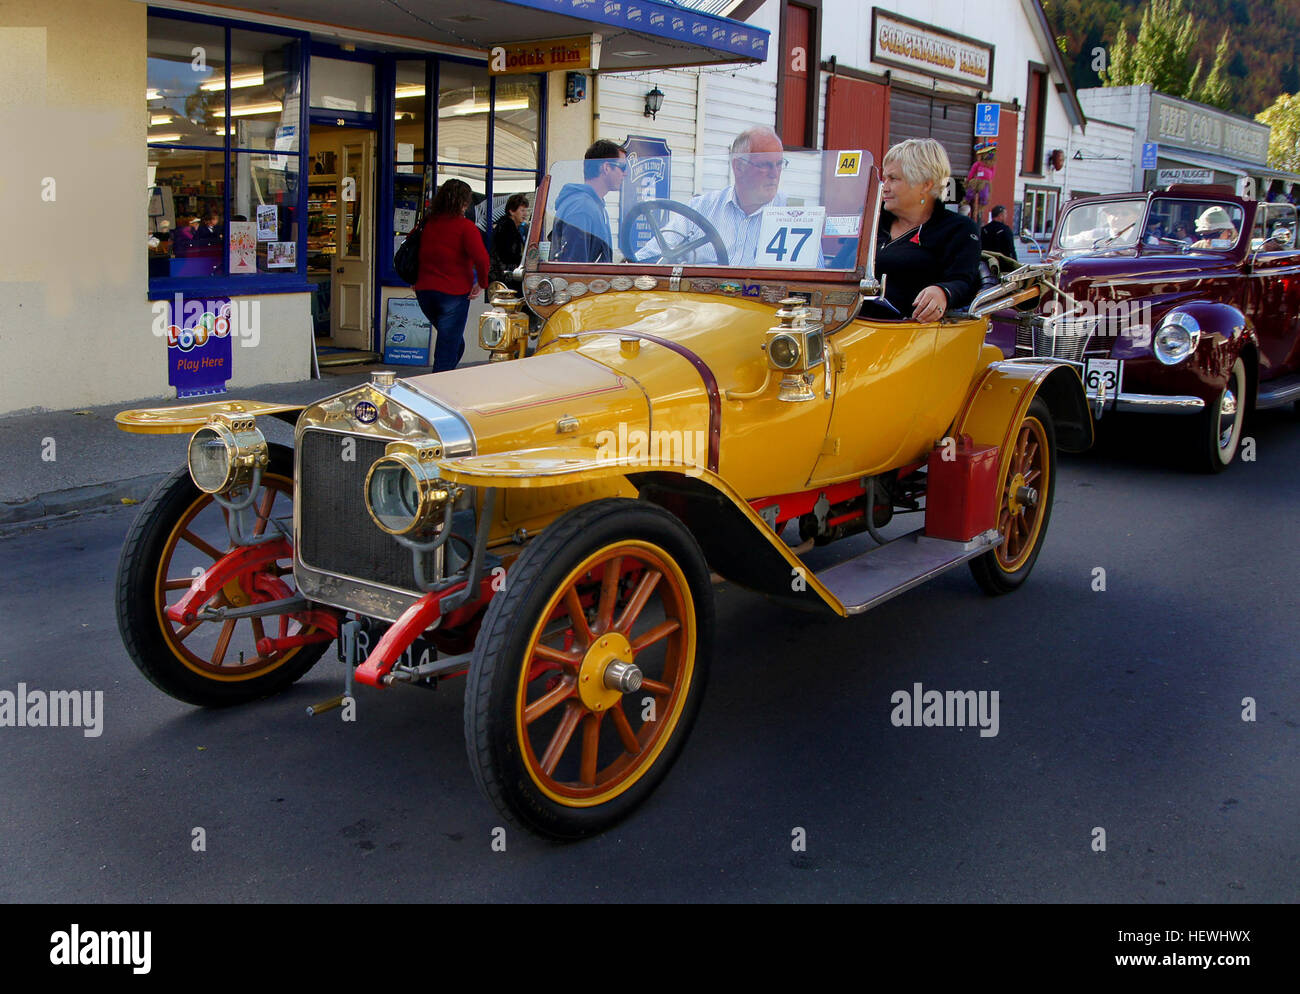 1914 Delage  Delage was a French luxury automobile and racecar company founded in 1905 by Louis Delage in Levallois-Perret near Paris; it was acquired by Delahaye in 1935 and ceased operation in 1953. Stock Photo